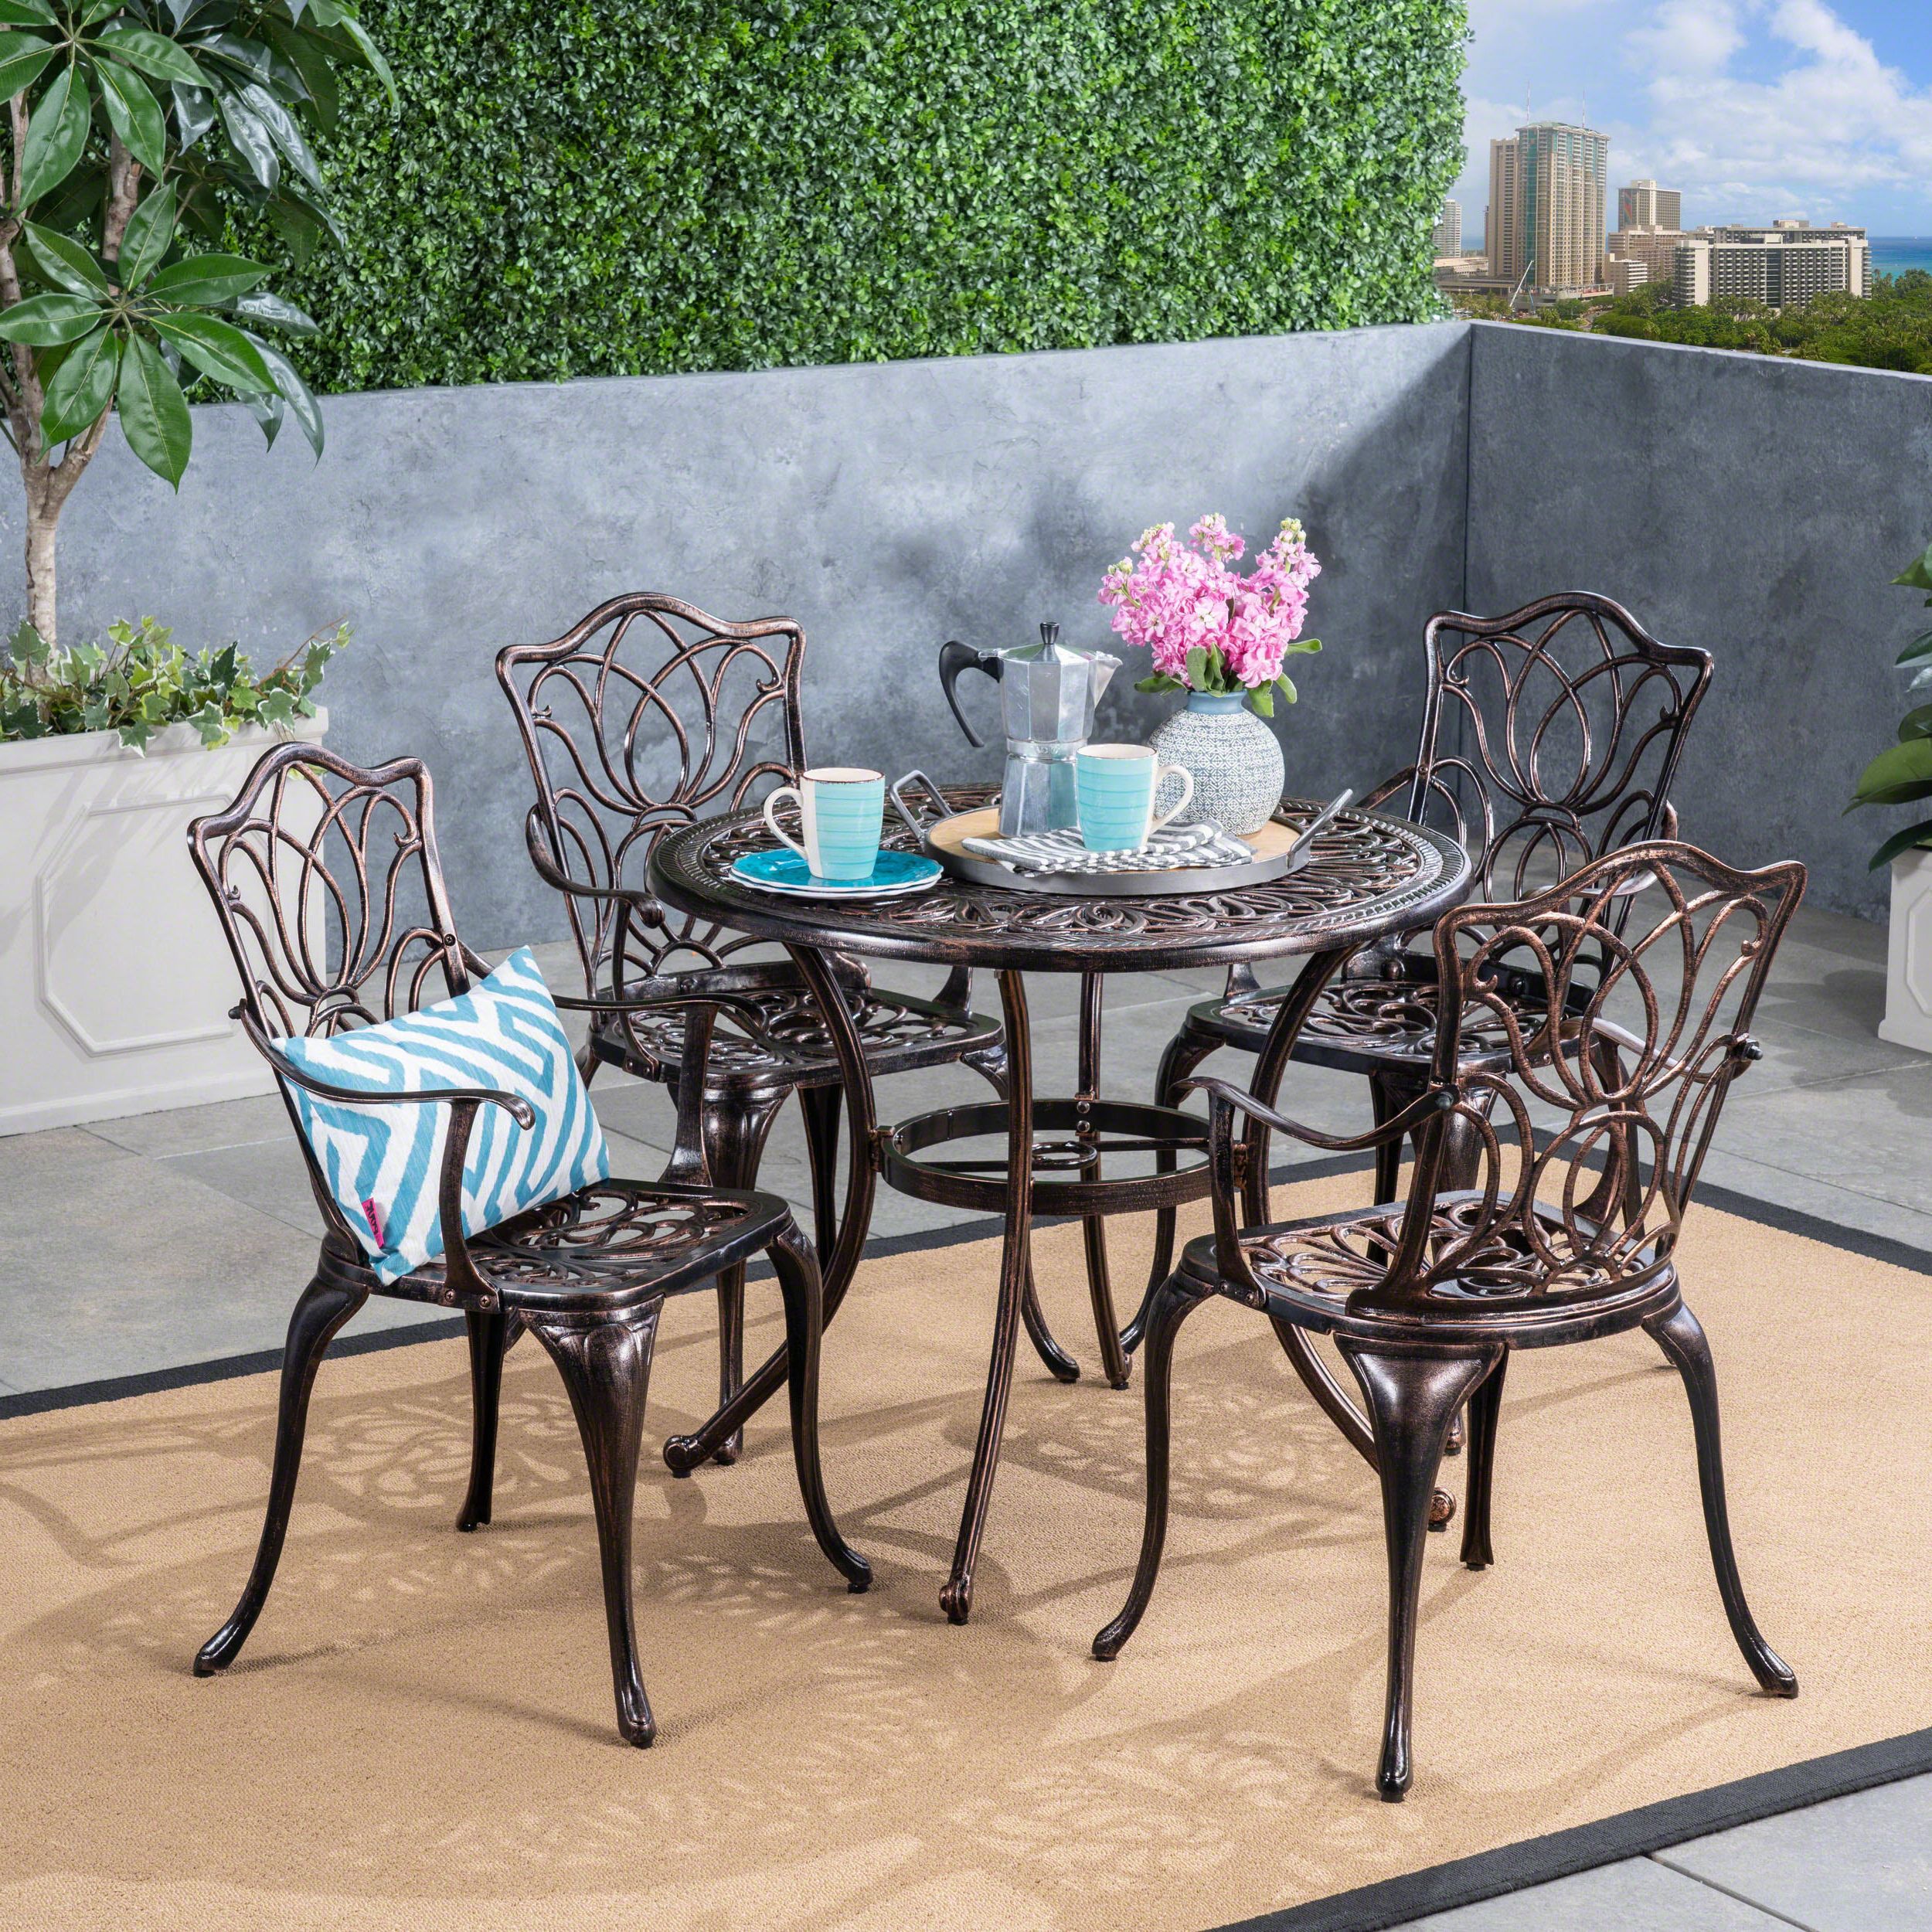 5 Piece Patio Sets Intended For Trendy Clayton Outdoor 5 Piece Cast Aluminum Round Table Dining Set, Shiny (View 2 of 15)